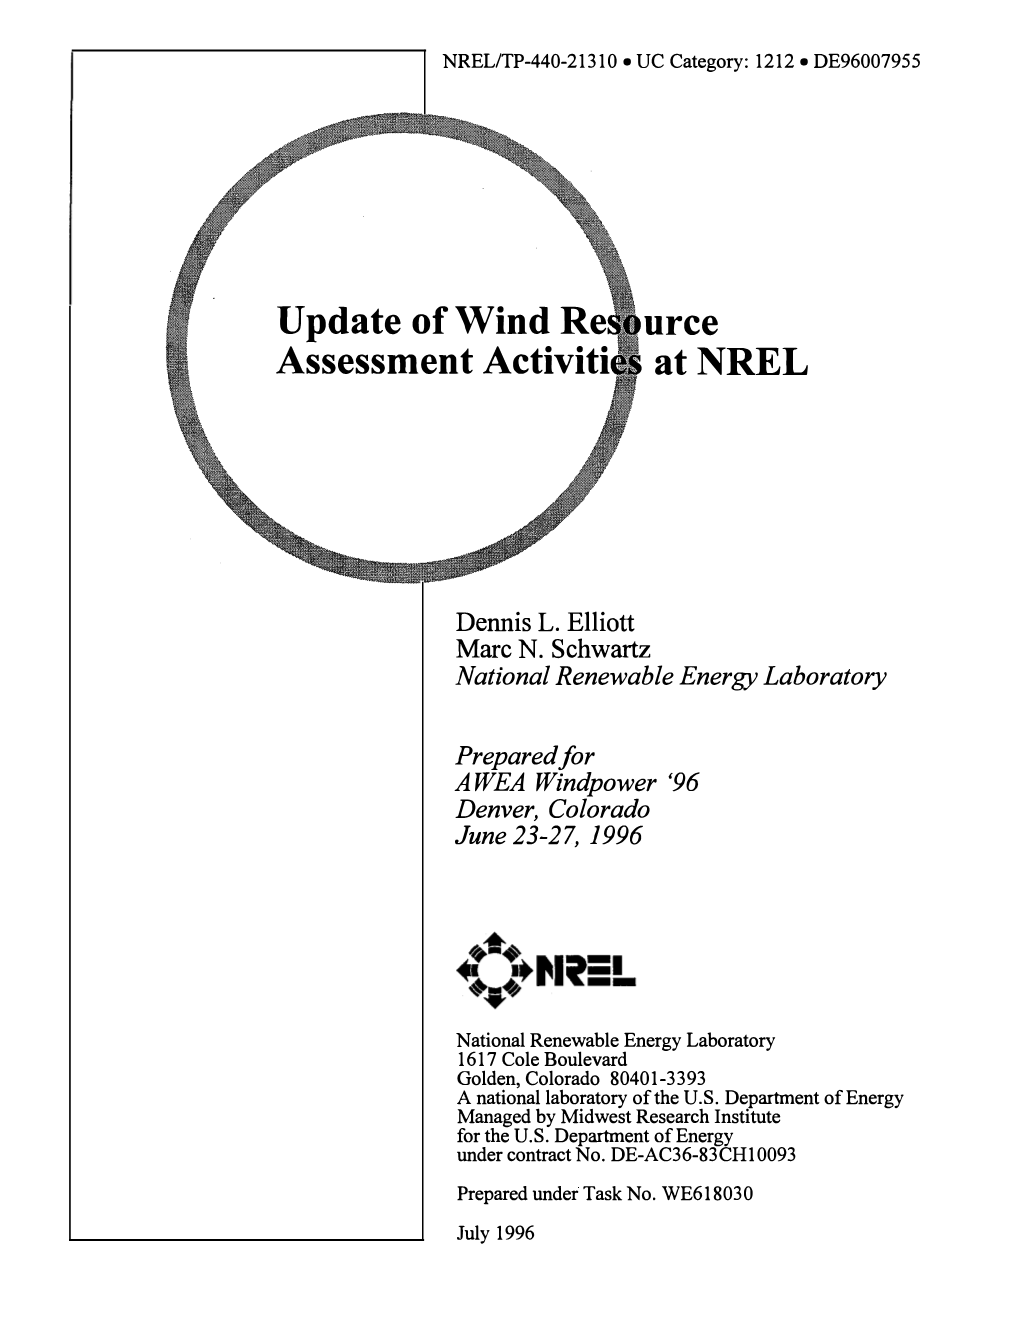 Update of Wind Resource Assessment Activities at NREL